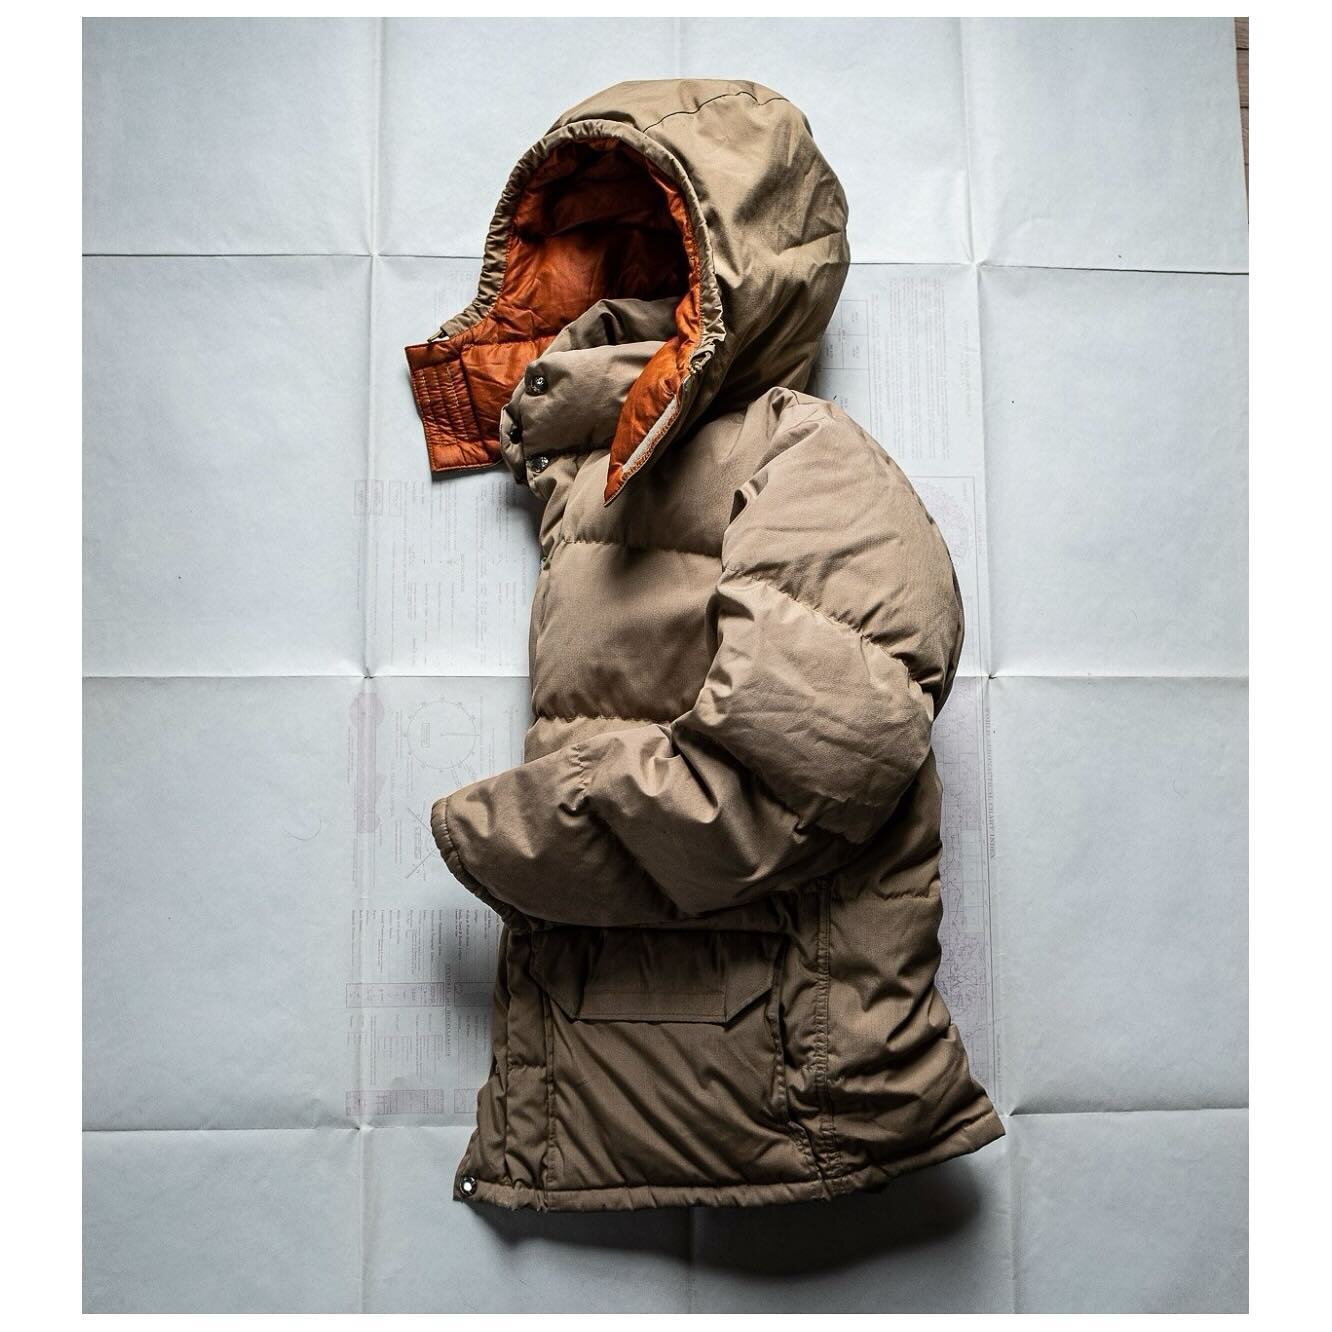 For Sale. A very fine mint condition vintage @thenorthface goose down expedition parka in khaki/ hi-viz orange available on the website now.